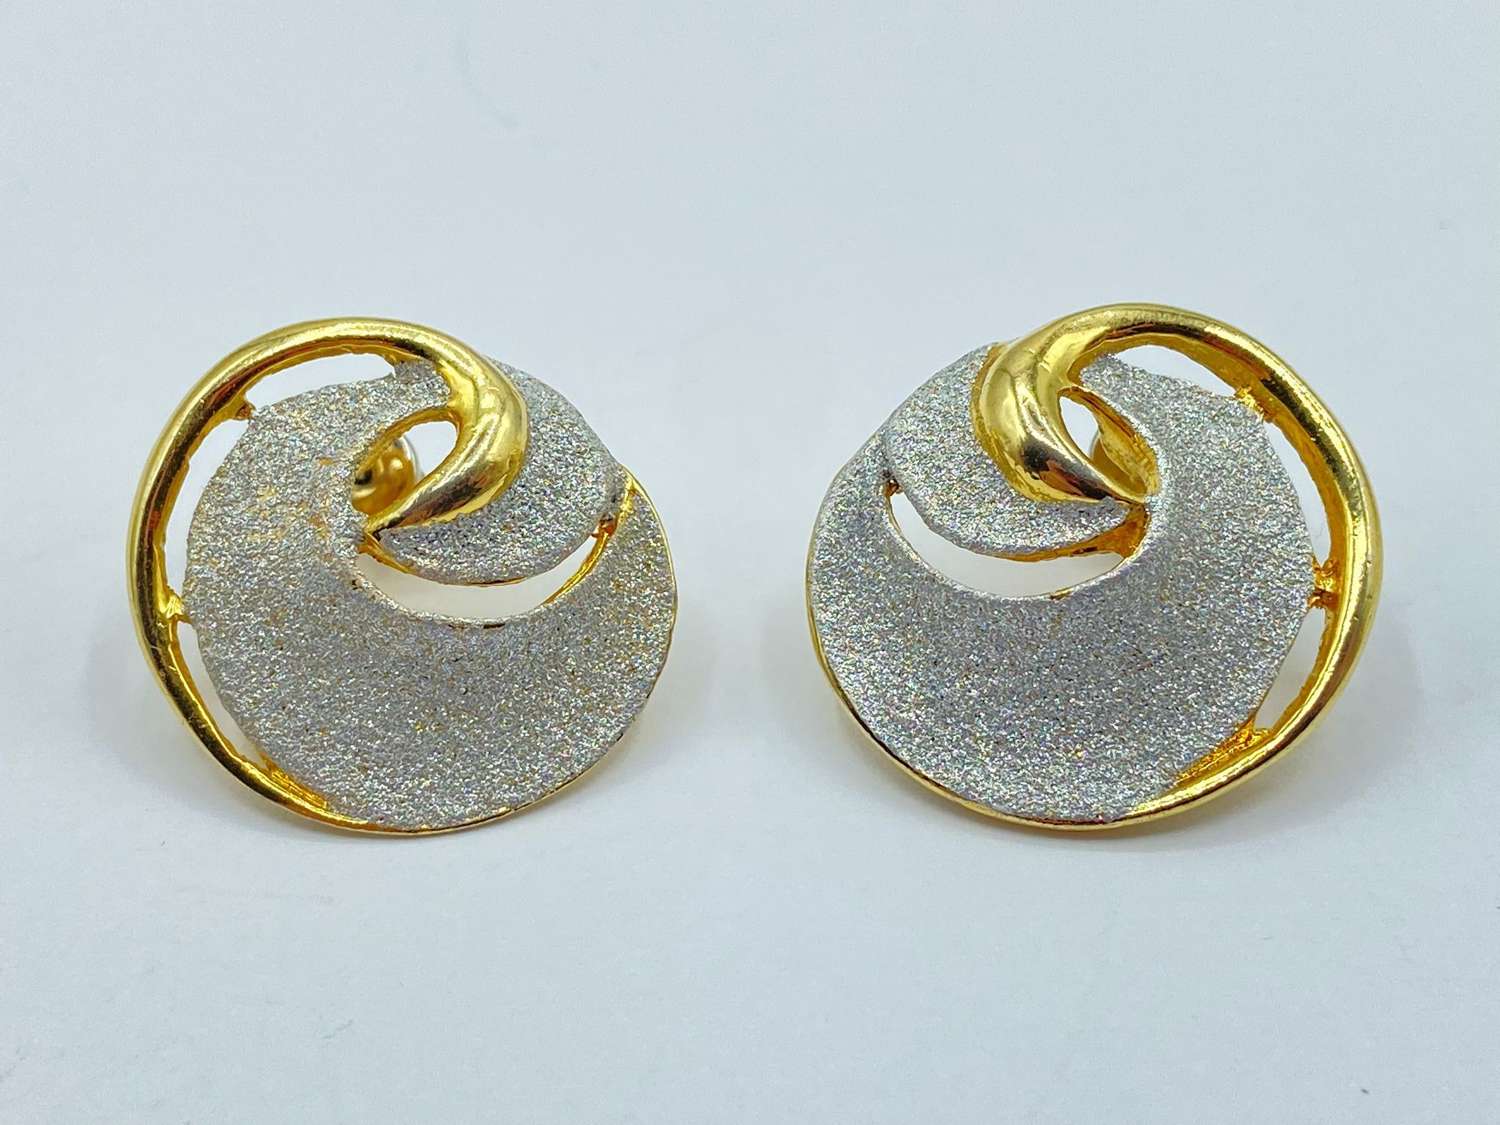 Beautiful Vintage Curvaceous Gold & Silver Tone Stud Earrings